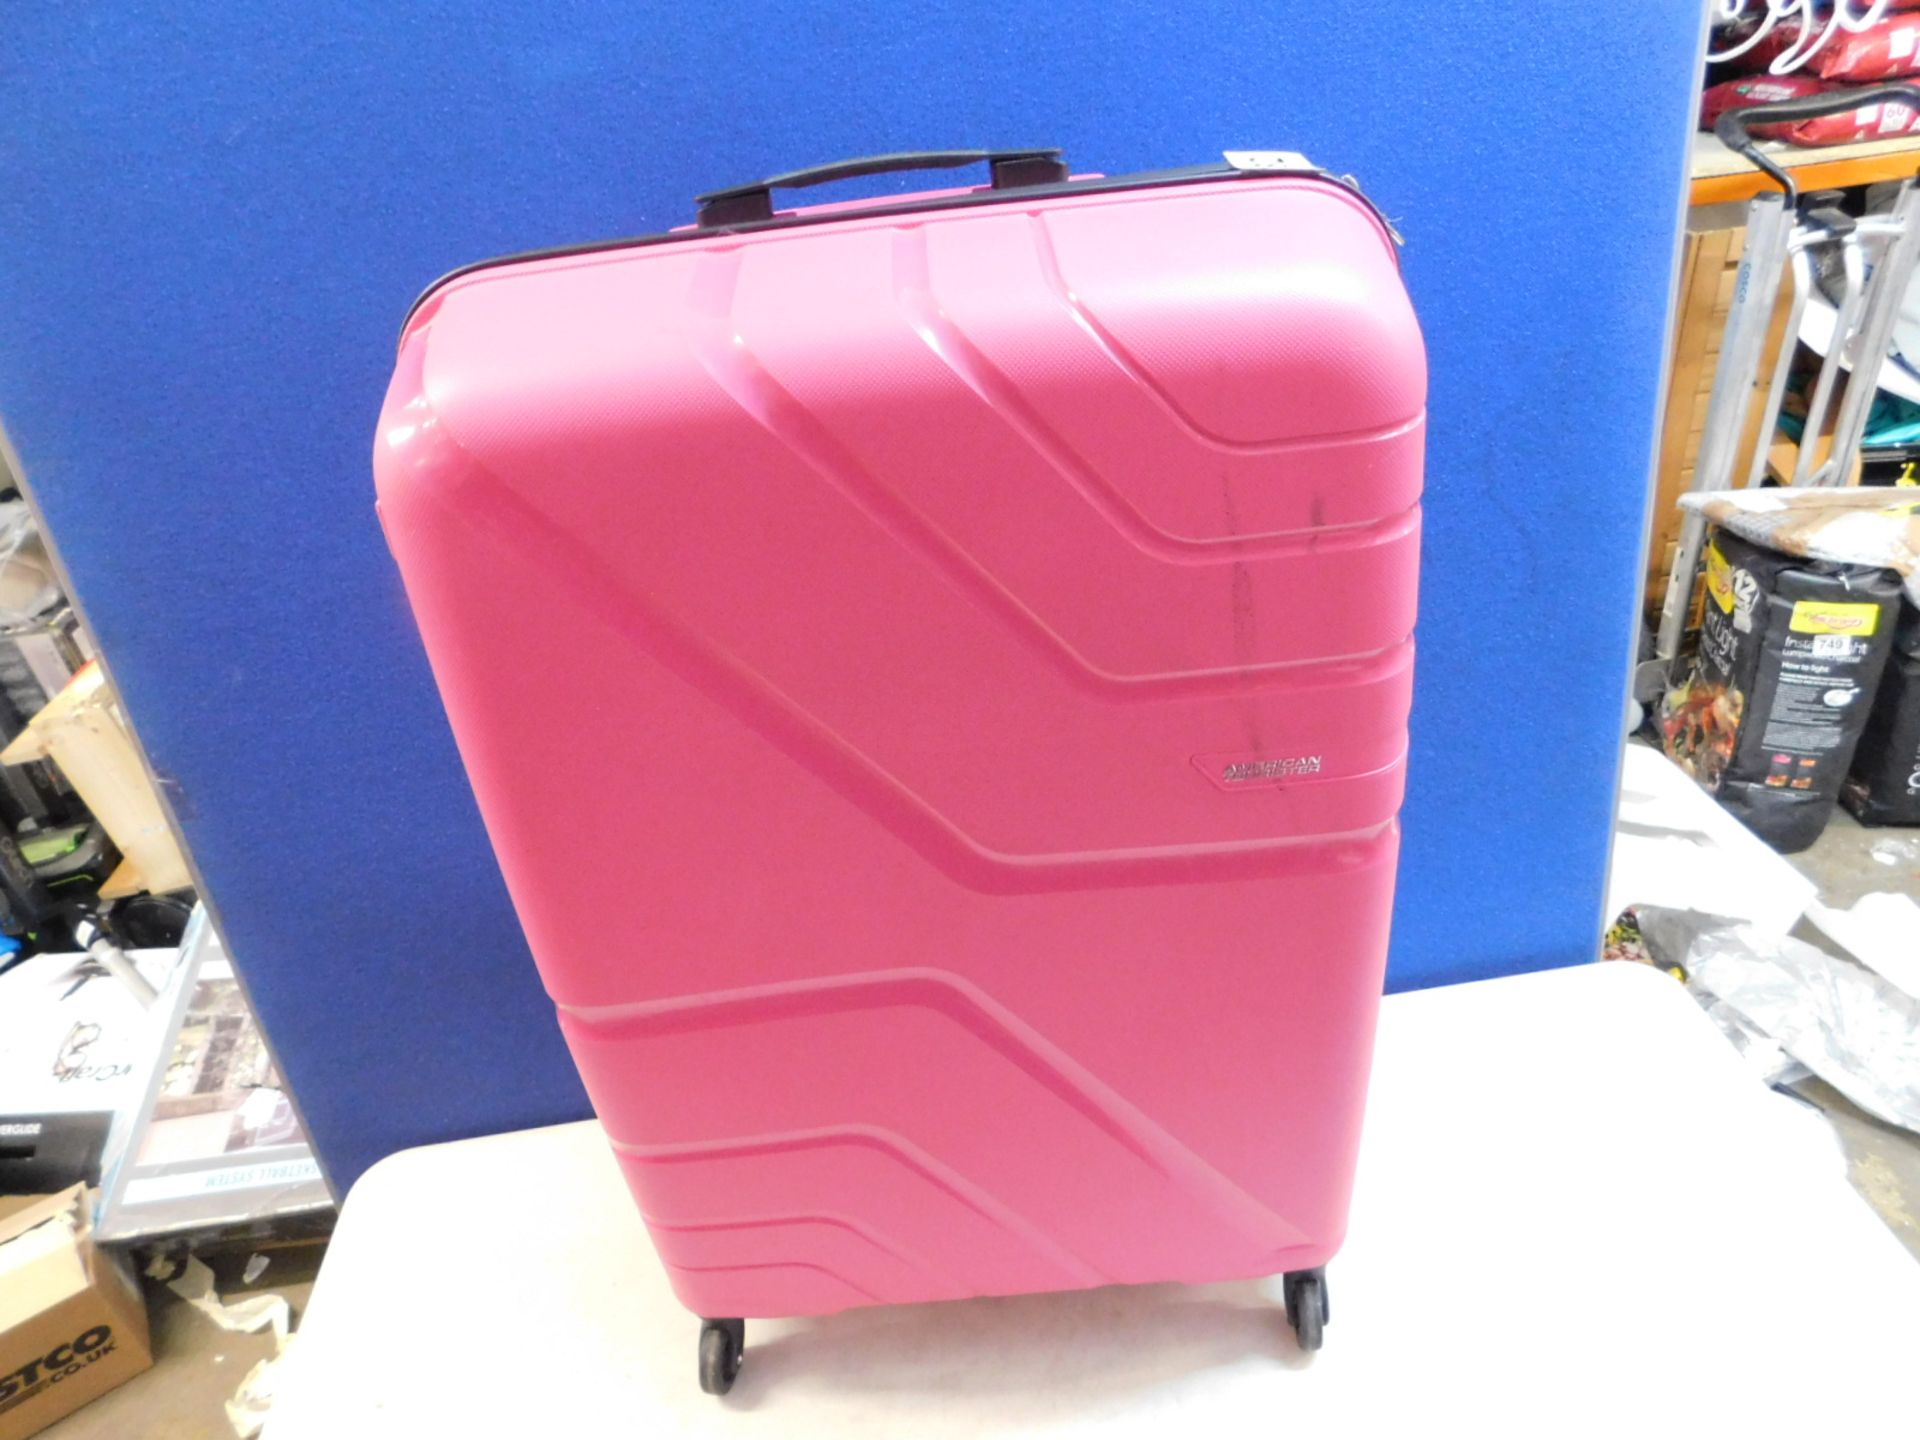 1 AMERICAN TOURISTER LIGHT PINK HARDSIDE PROTECTION LARGE LUGGAGE RRP Â£99